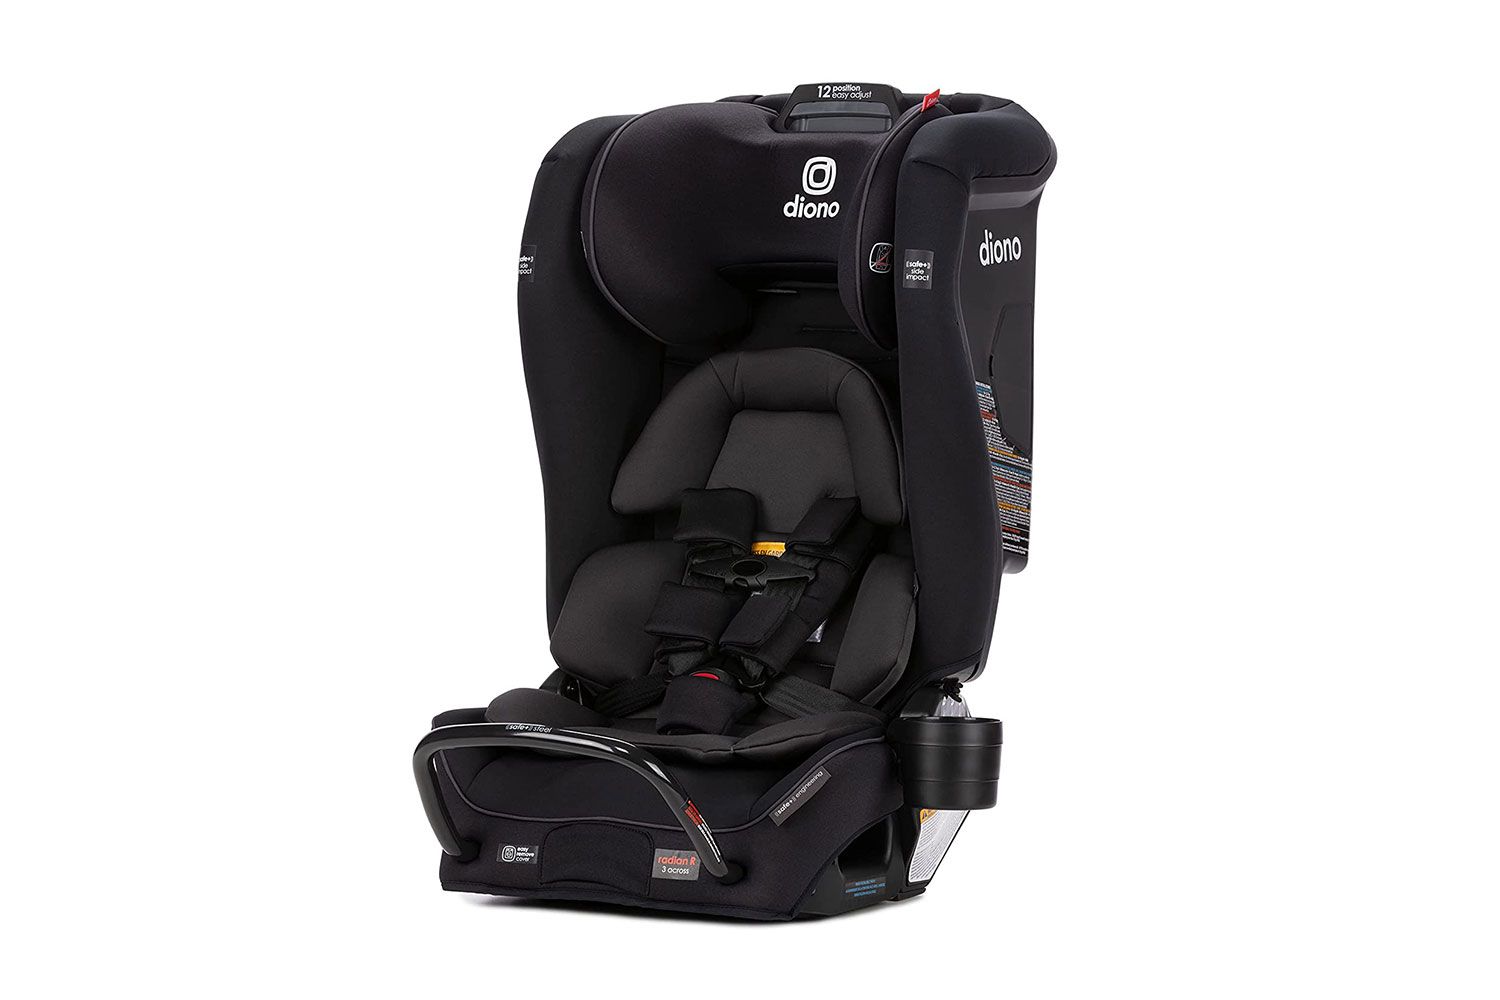 Diono Radian 3RXT Convertible Car Seat With SafePlus